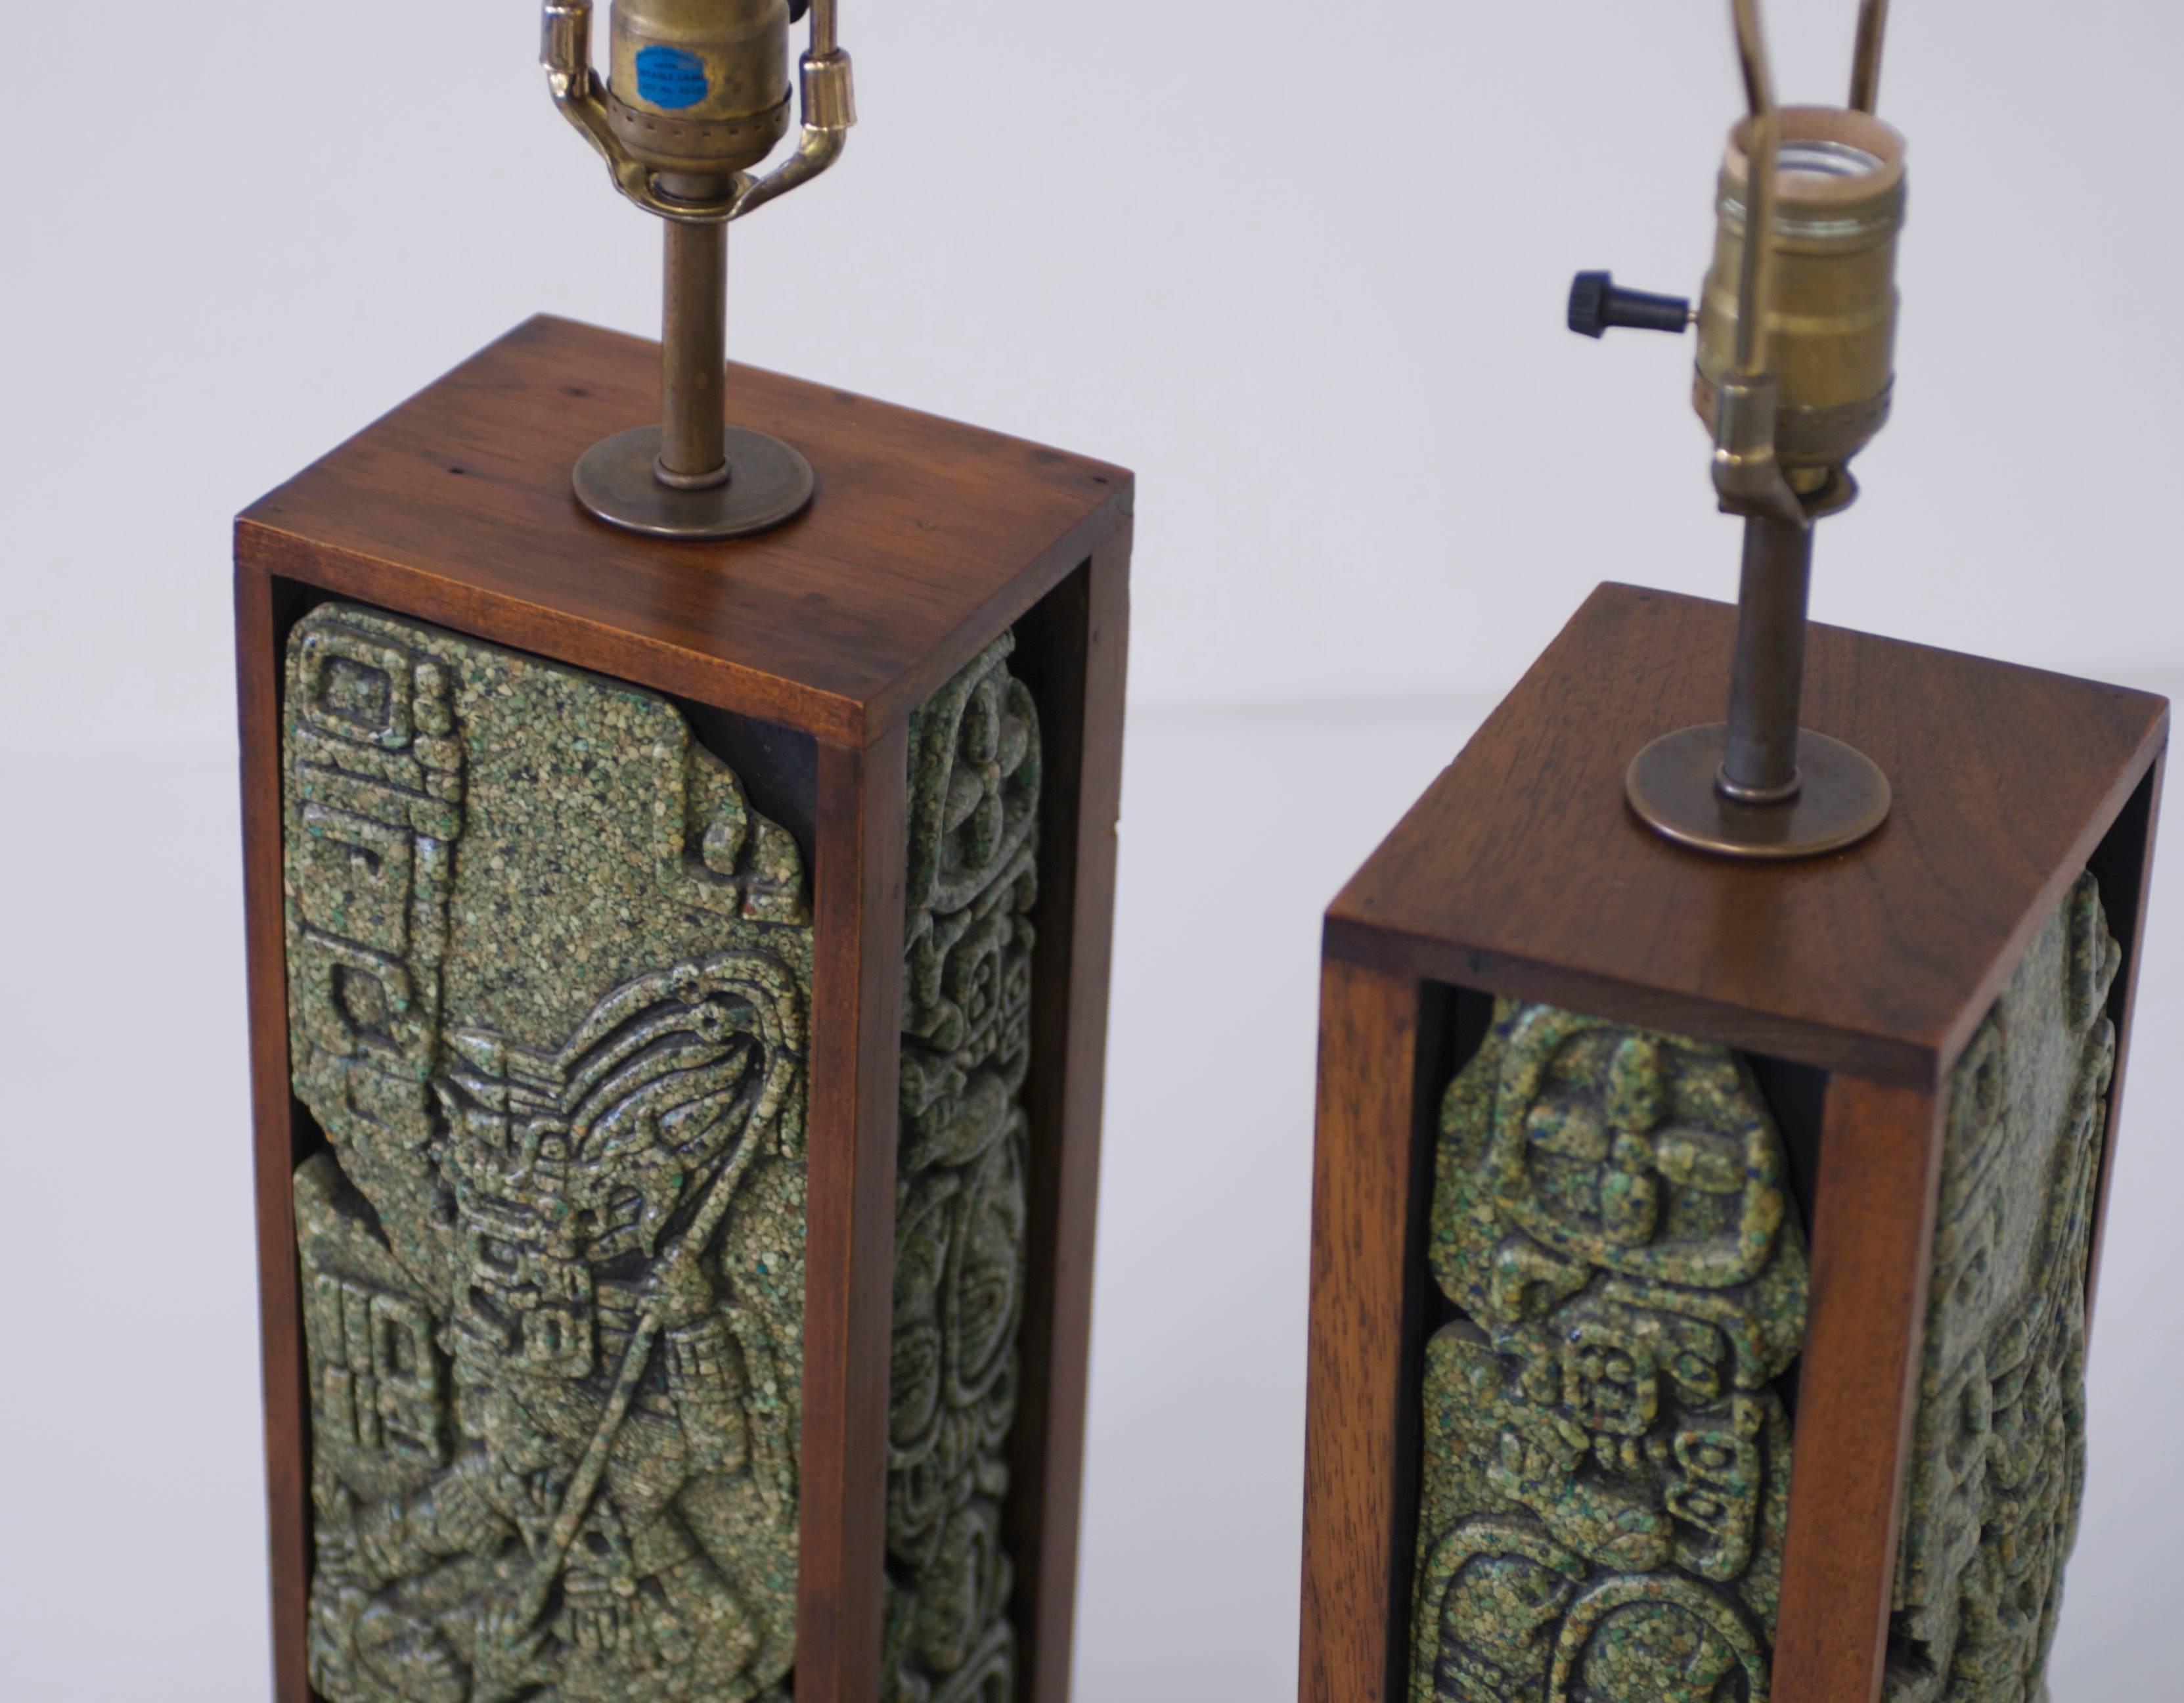 A 1960s era pair of Mexican table lamps with a Mayan motif featuring a stepped up base. The lamps are made of mahogany wood and feature Zarebski's patented malachite stone resin mix. Zarebski Industries was based in Cuernavaca, Mexico and run by